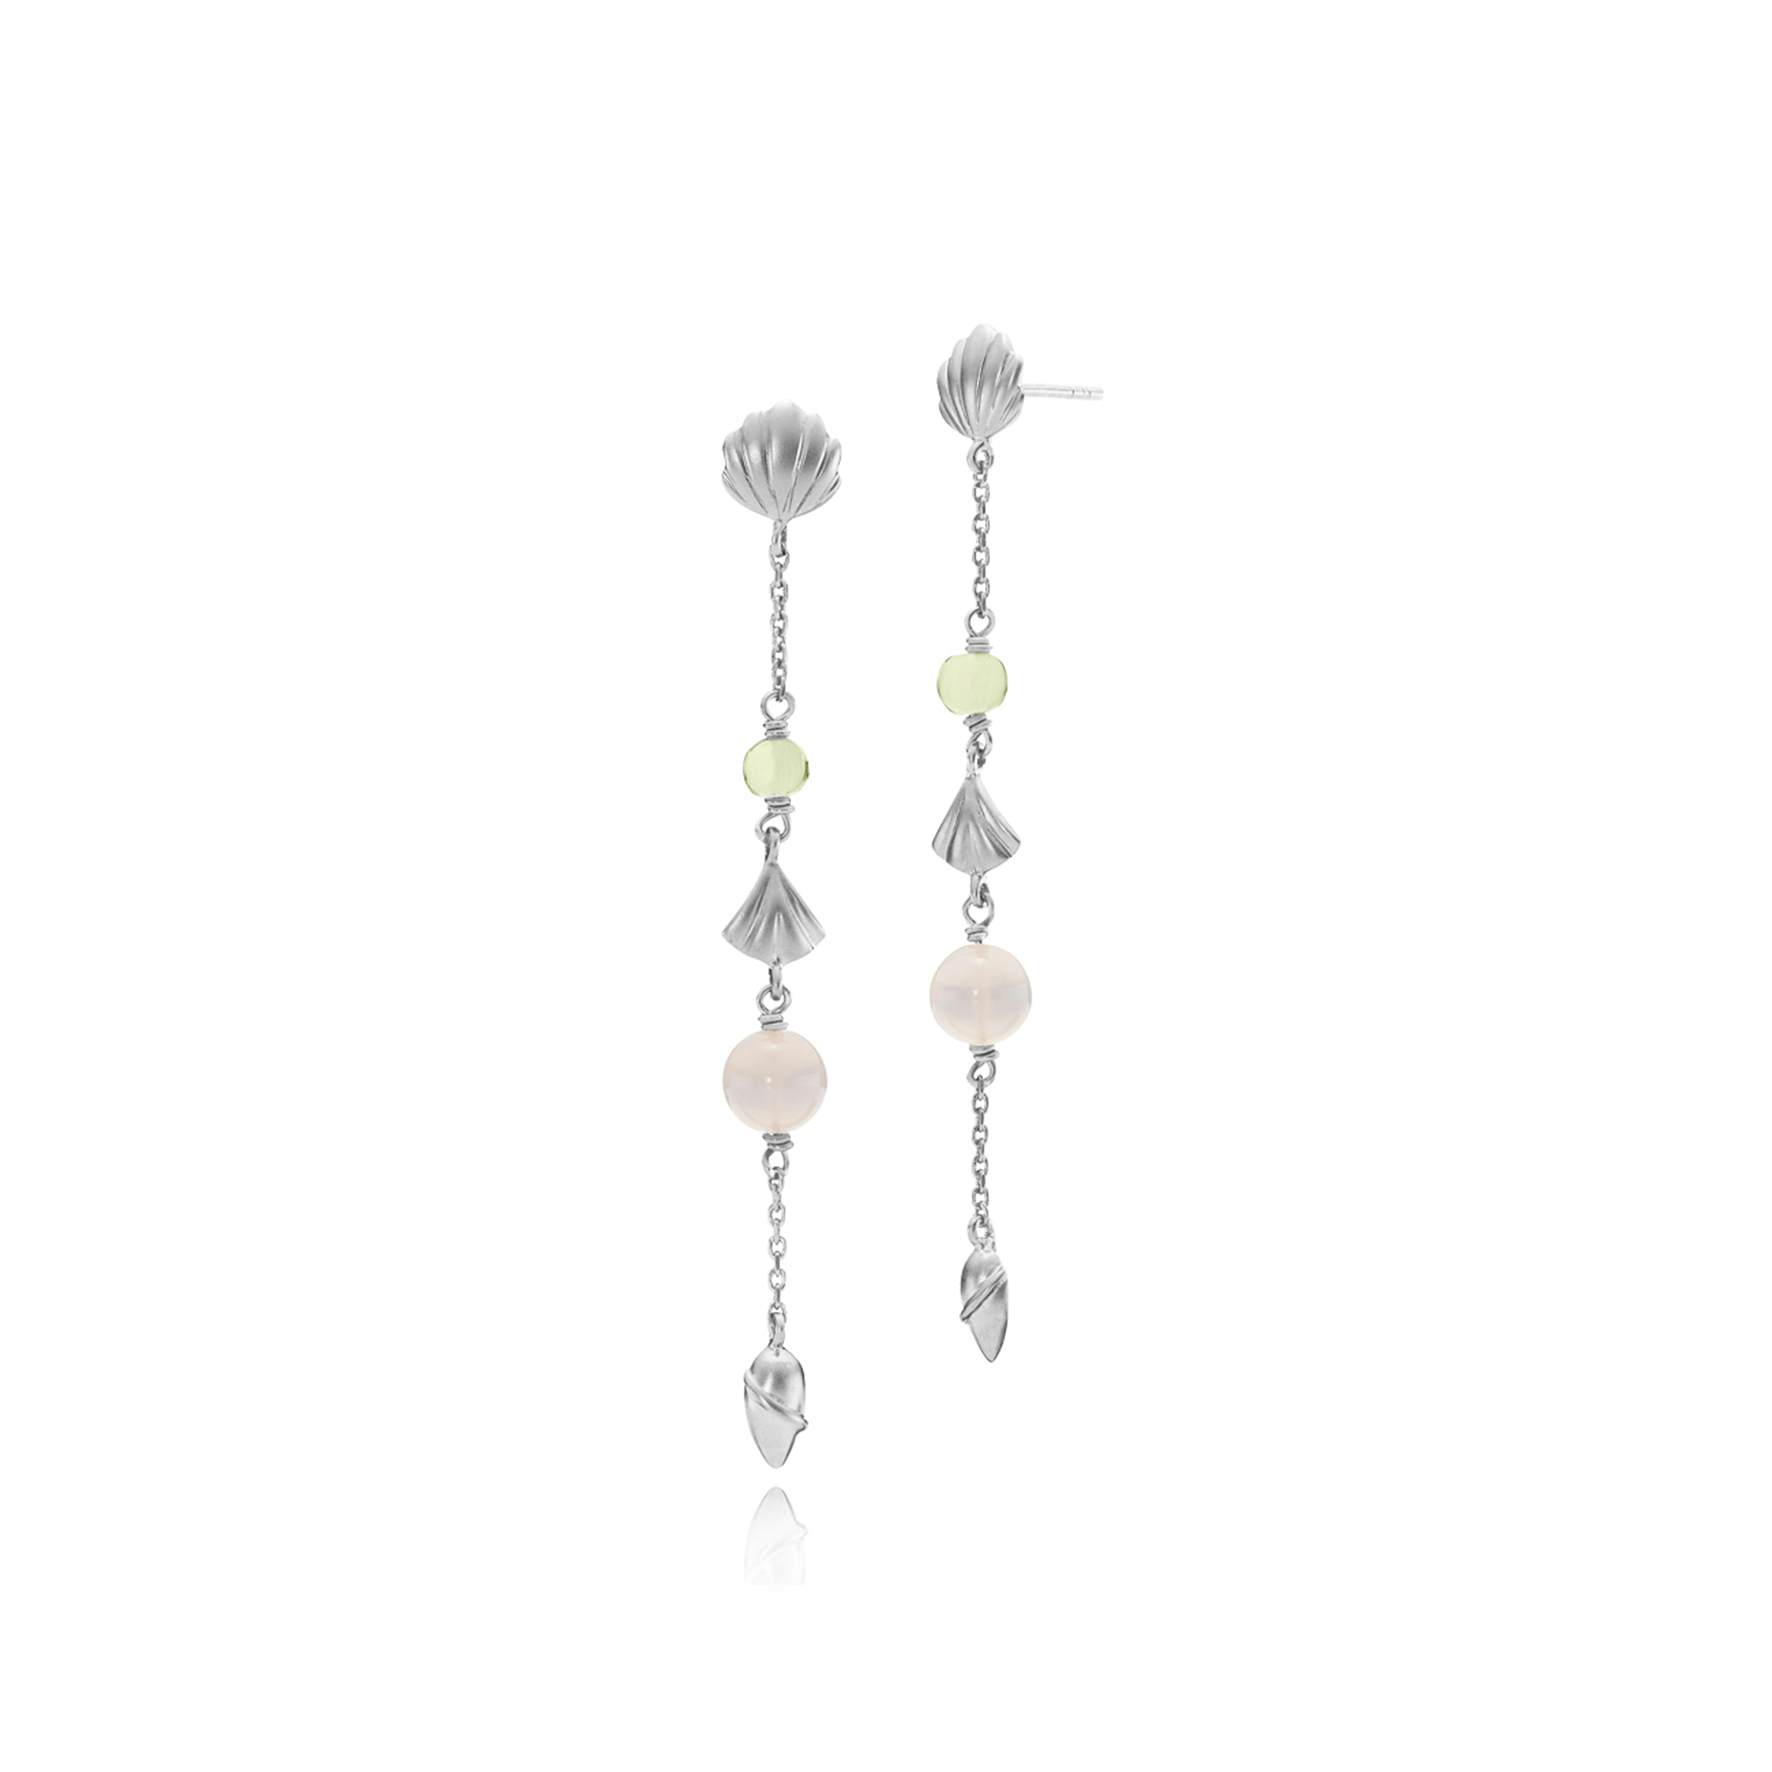 Isabella Pink/Green Long Earrings from Izabel Camille in Silver Sterling 925